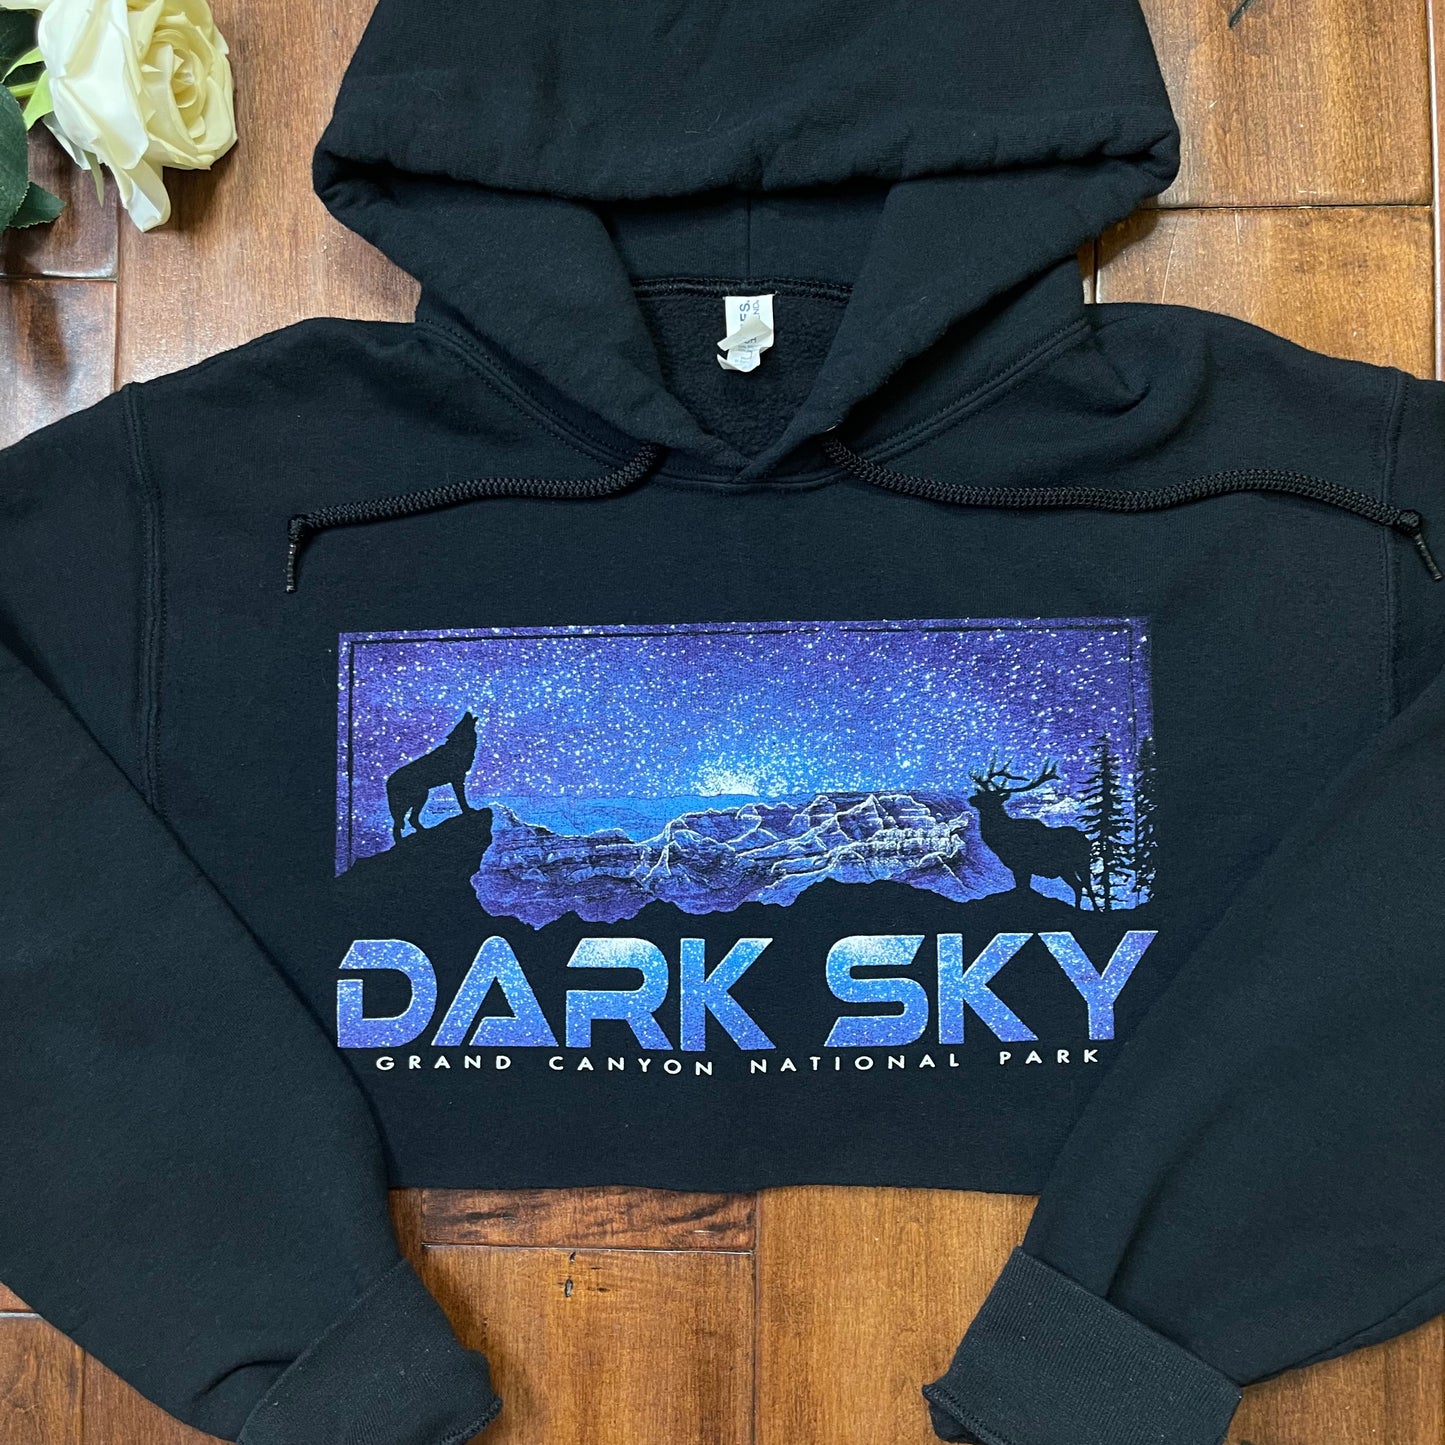 THRIFTED “DARK SIDE GRAND CANYON NATIONAL PARK” CROPPED HOODIE